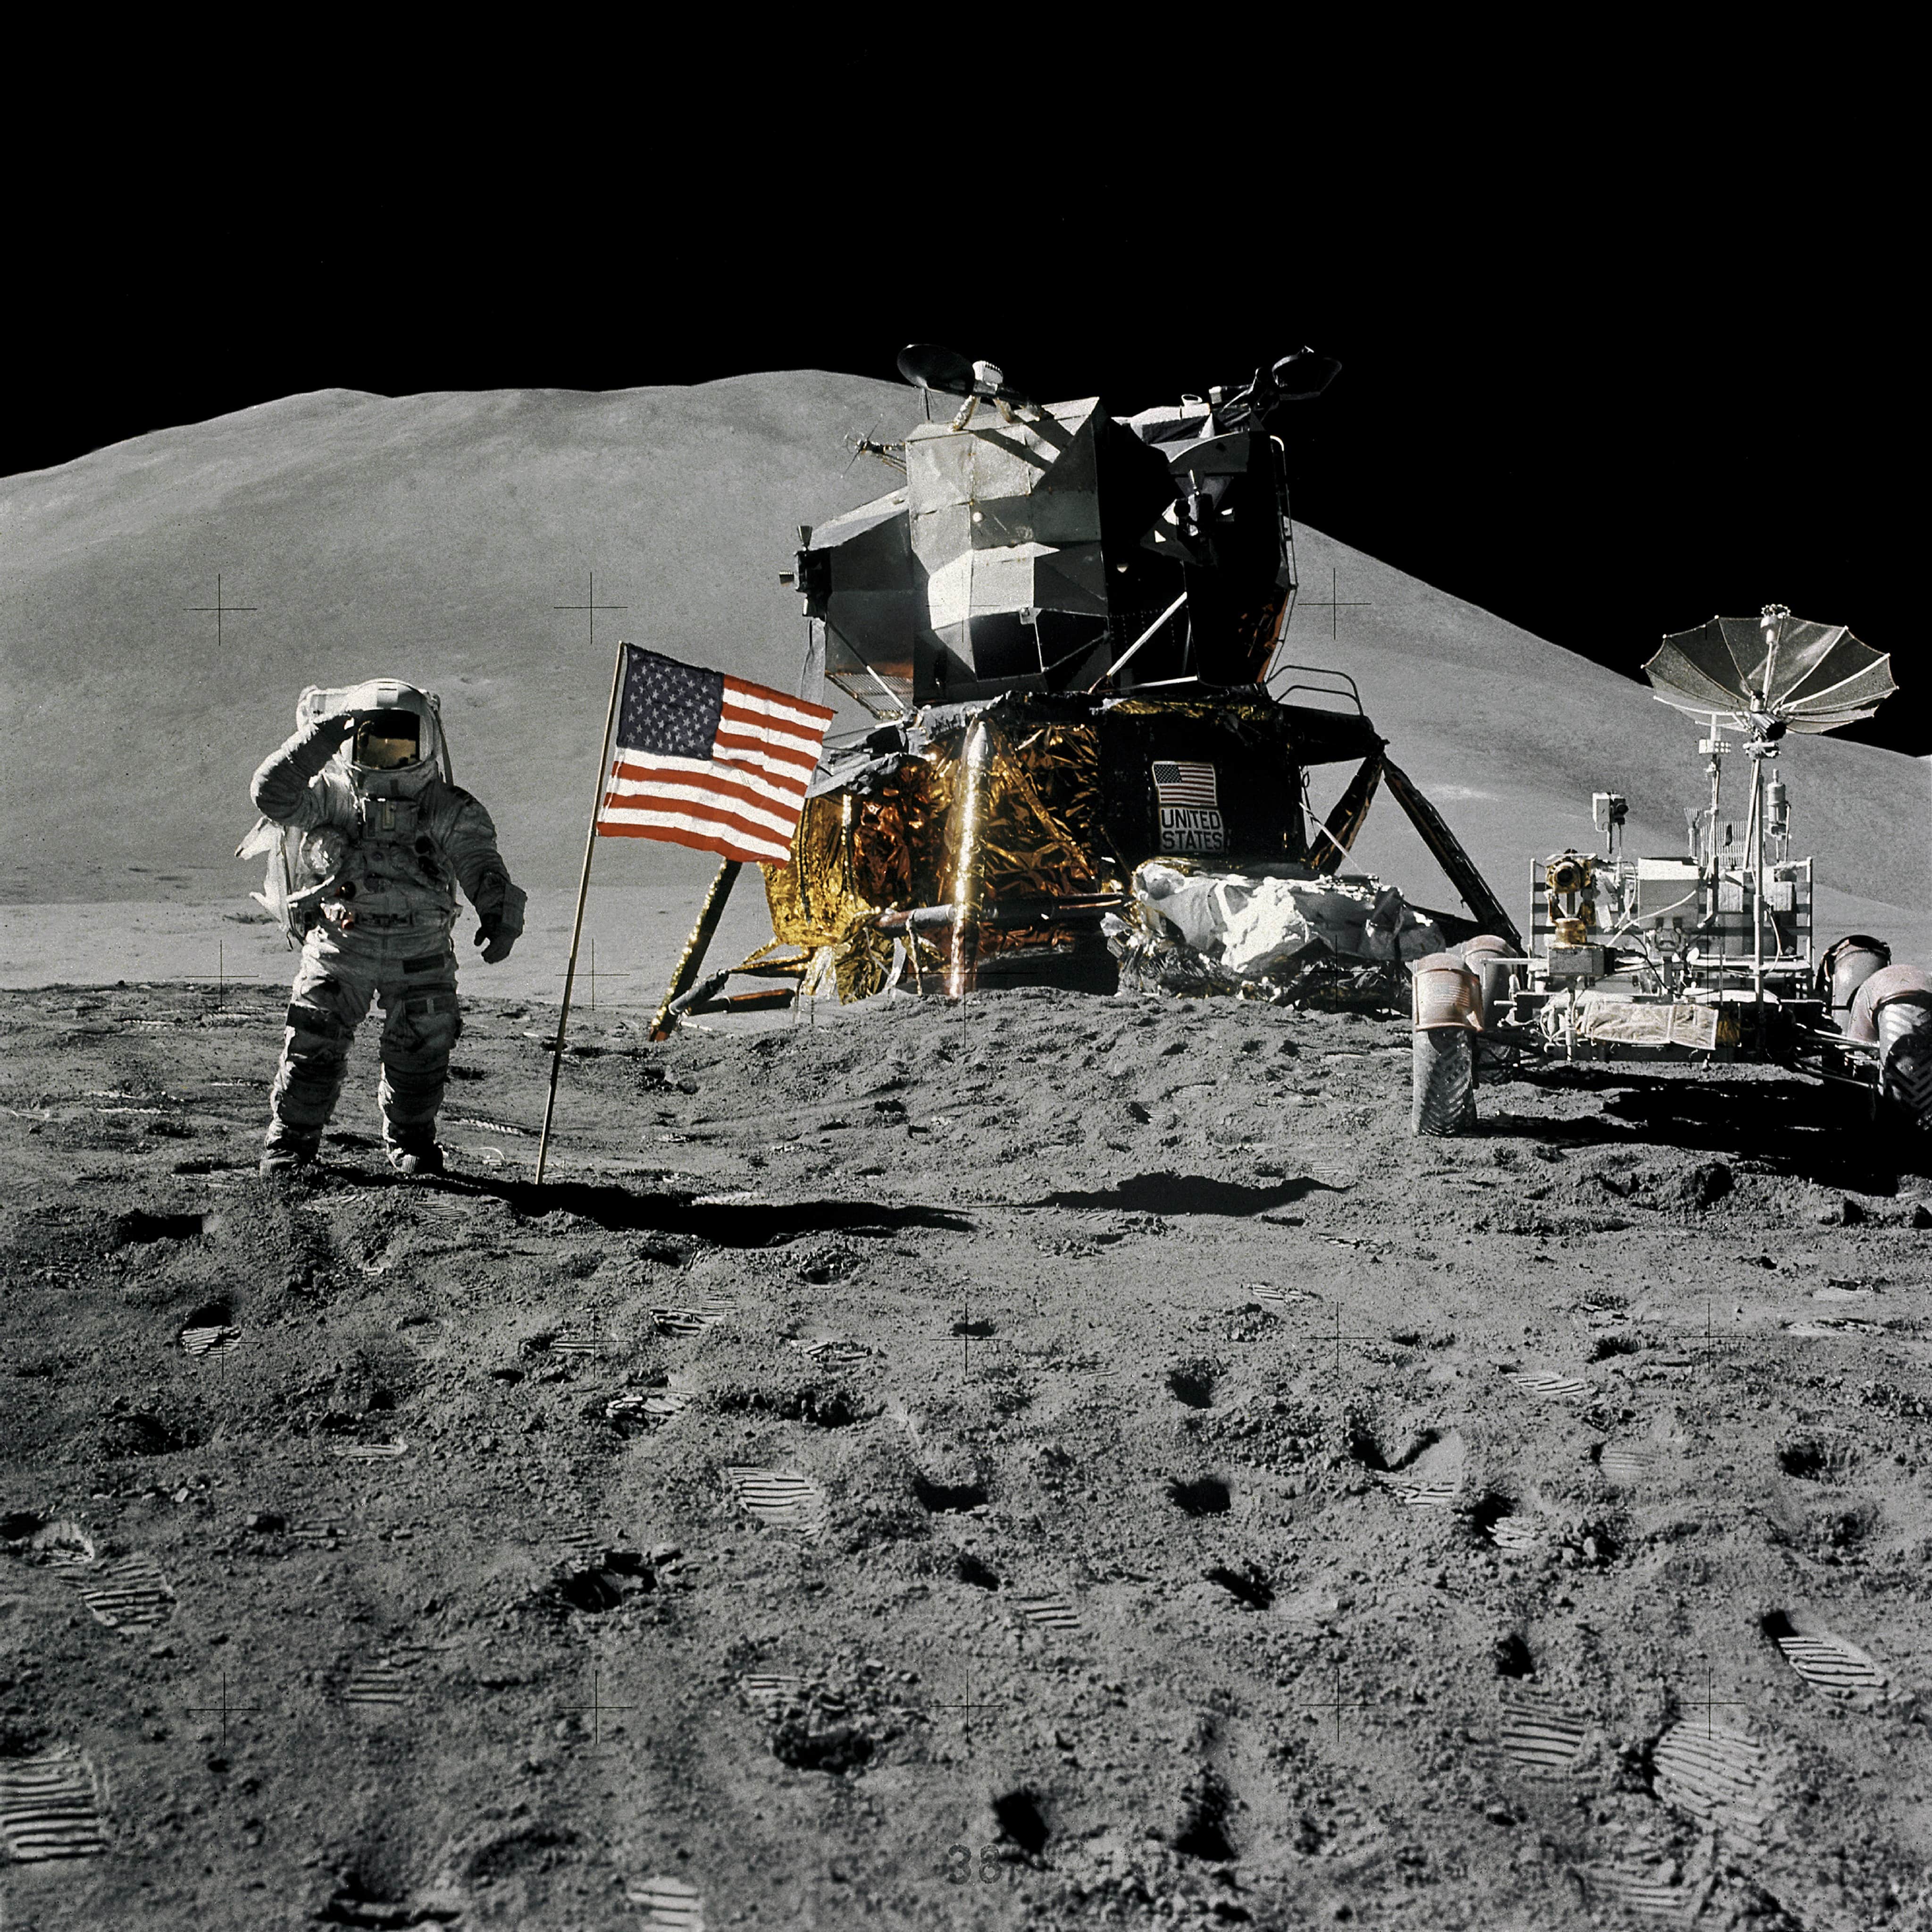 How many moon missions could an iPhone manage? A lot of them!